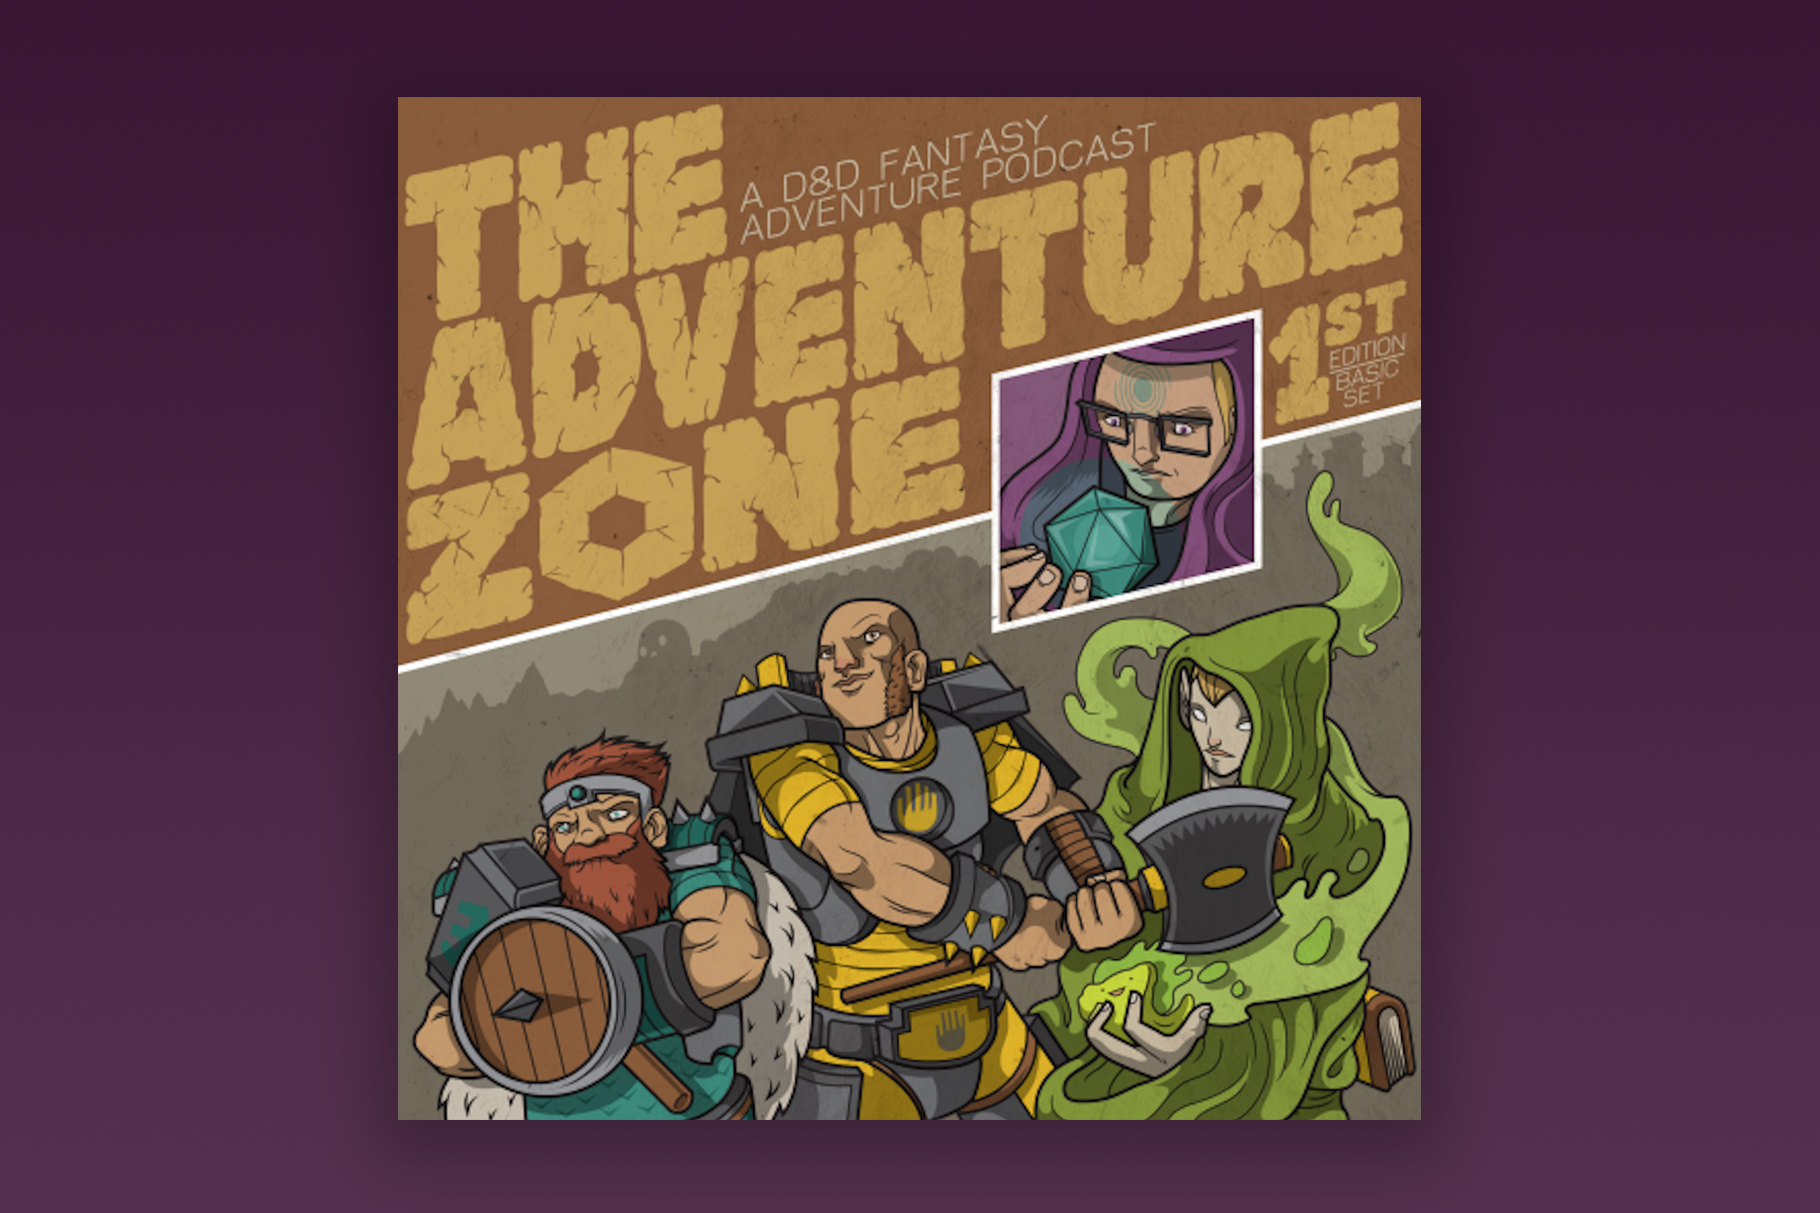 An illustration of Griffin, Merle, Magnus, and Taako. The top third of the image says “The Adventure Zone: A D&amp;D fantasy adventure podcast”. Between the title and the player characters is an Griffin in purple robes with blue circles on his forehead holding a d20. Below, Merle, Magnus, and Takao stand ready for battle. The illustration is on a dark to light purple gradient background.